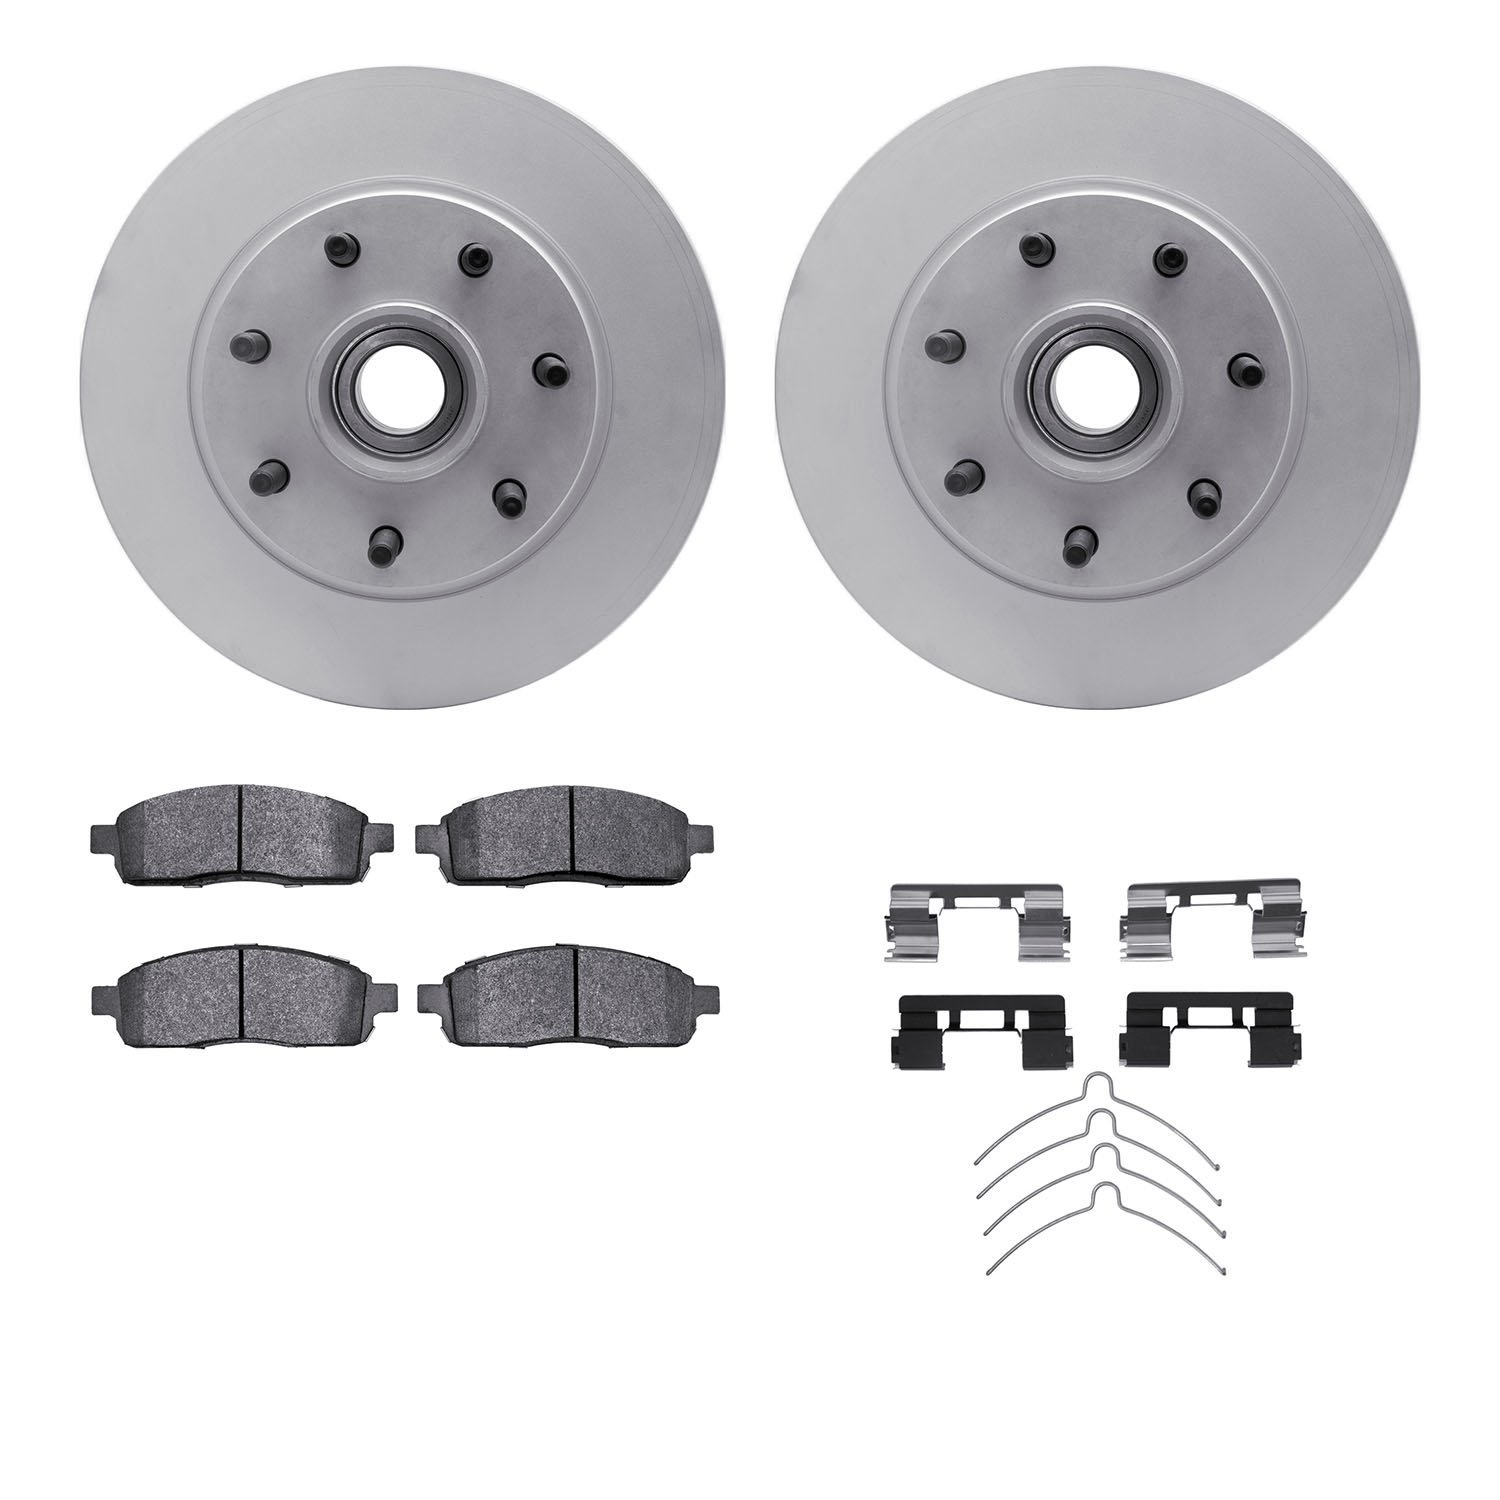 4412-54047 Geospec Brake Rotors with Ultimate-Duty Brake Pads & Hardware, 2004-2008 Ford/Lincoln/Mercury/Mazda, Position: Front